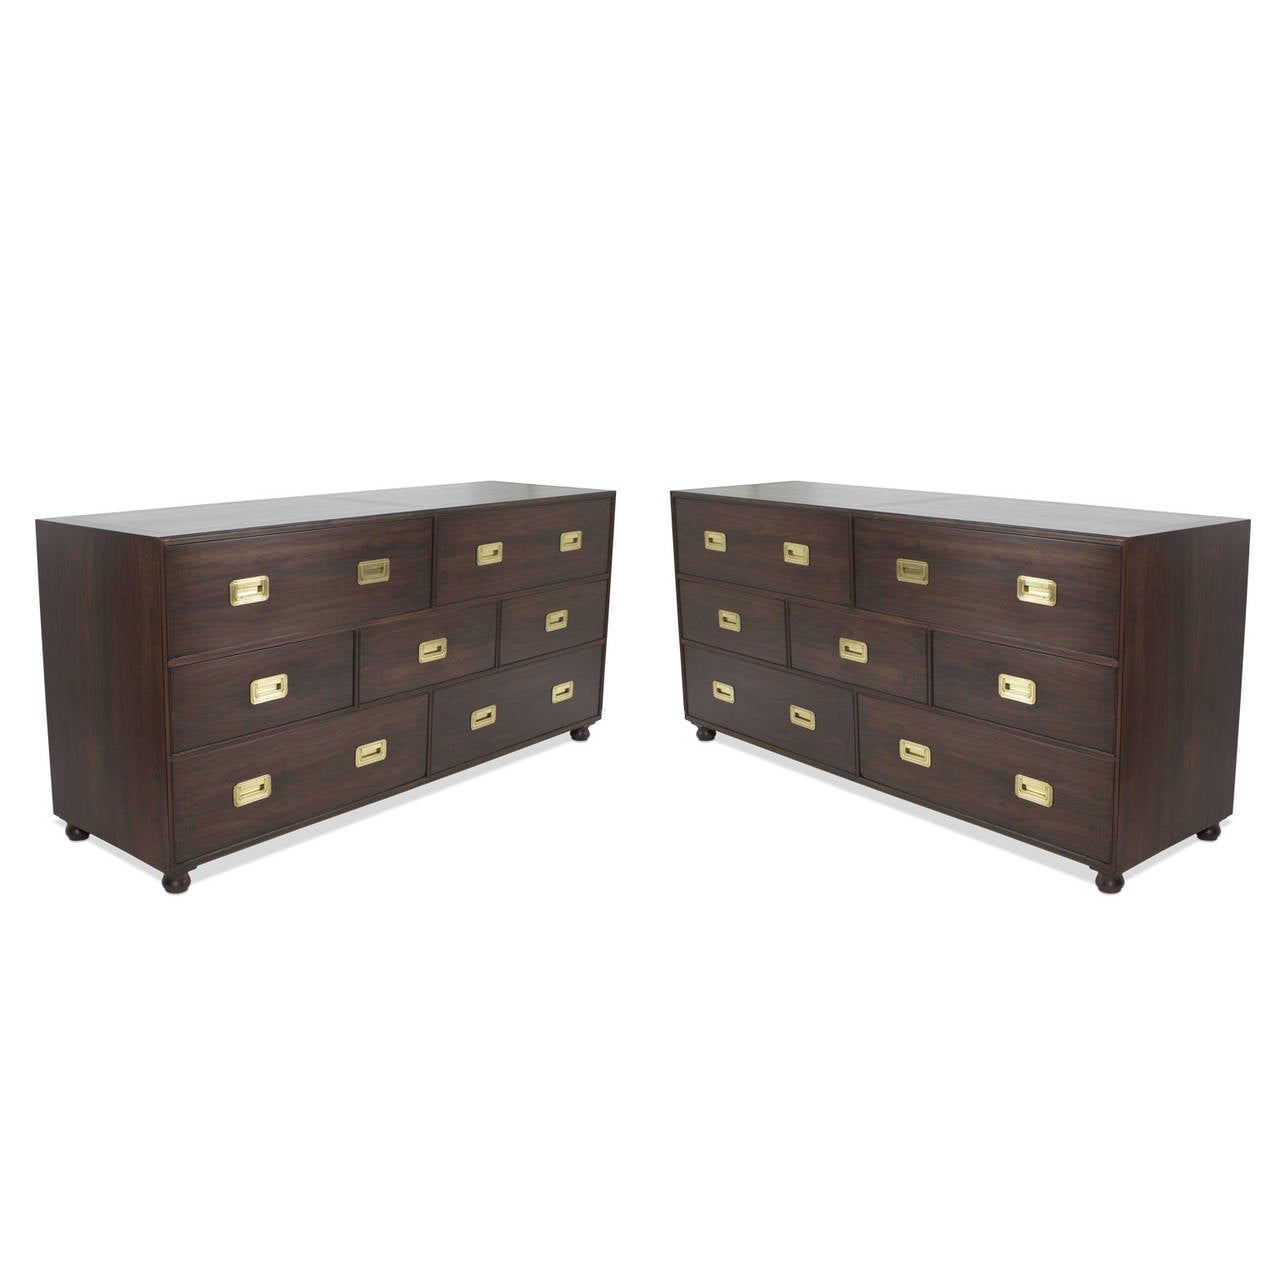 A pair of Baker Campaign style chests, dressers or sideboards, in a traditional form with a Mid-Century Modern vibe, all in a chic modern custom finish, complimented with brass inset hardware on seven off set drawers all-over bun feet. Newly